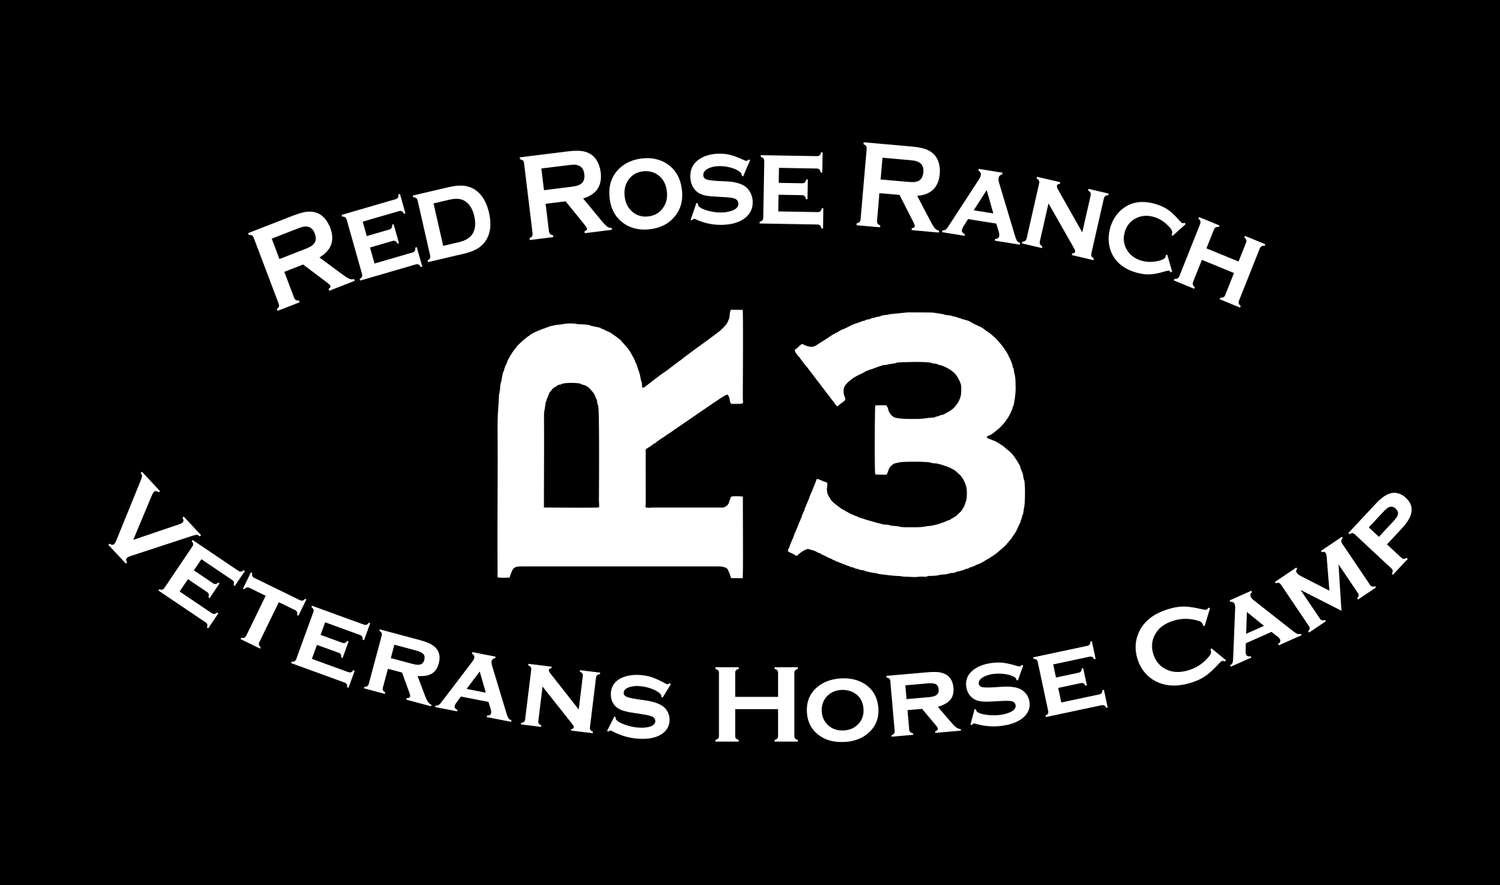 Red Rose Ranch